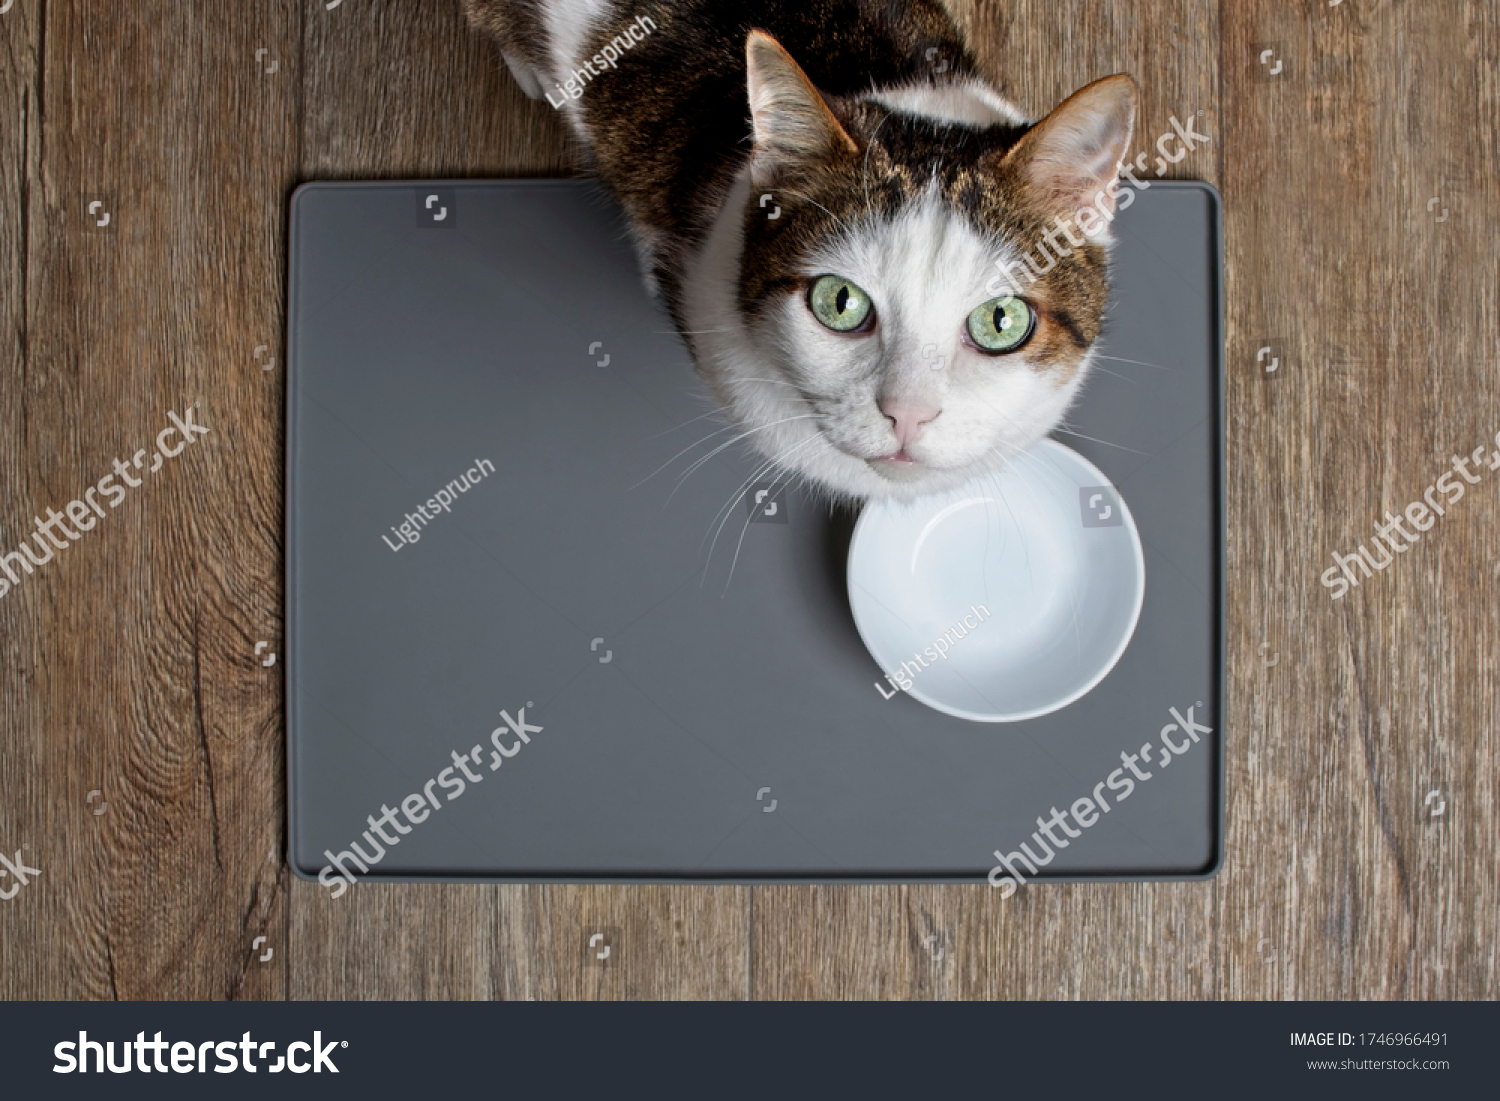 Tabby cat sitting in front of a emty food dish and looking to the camera. High angle view with copy space. #1746966491